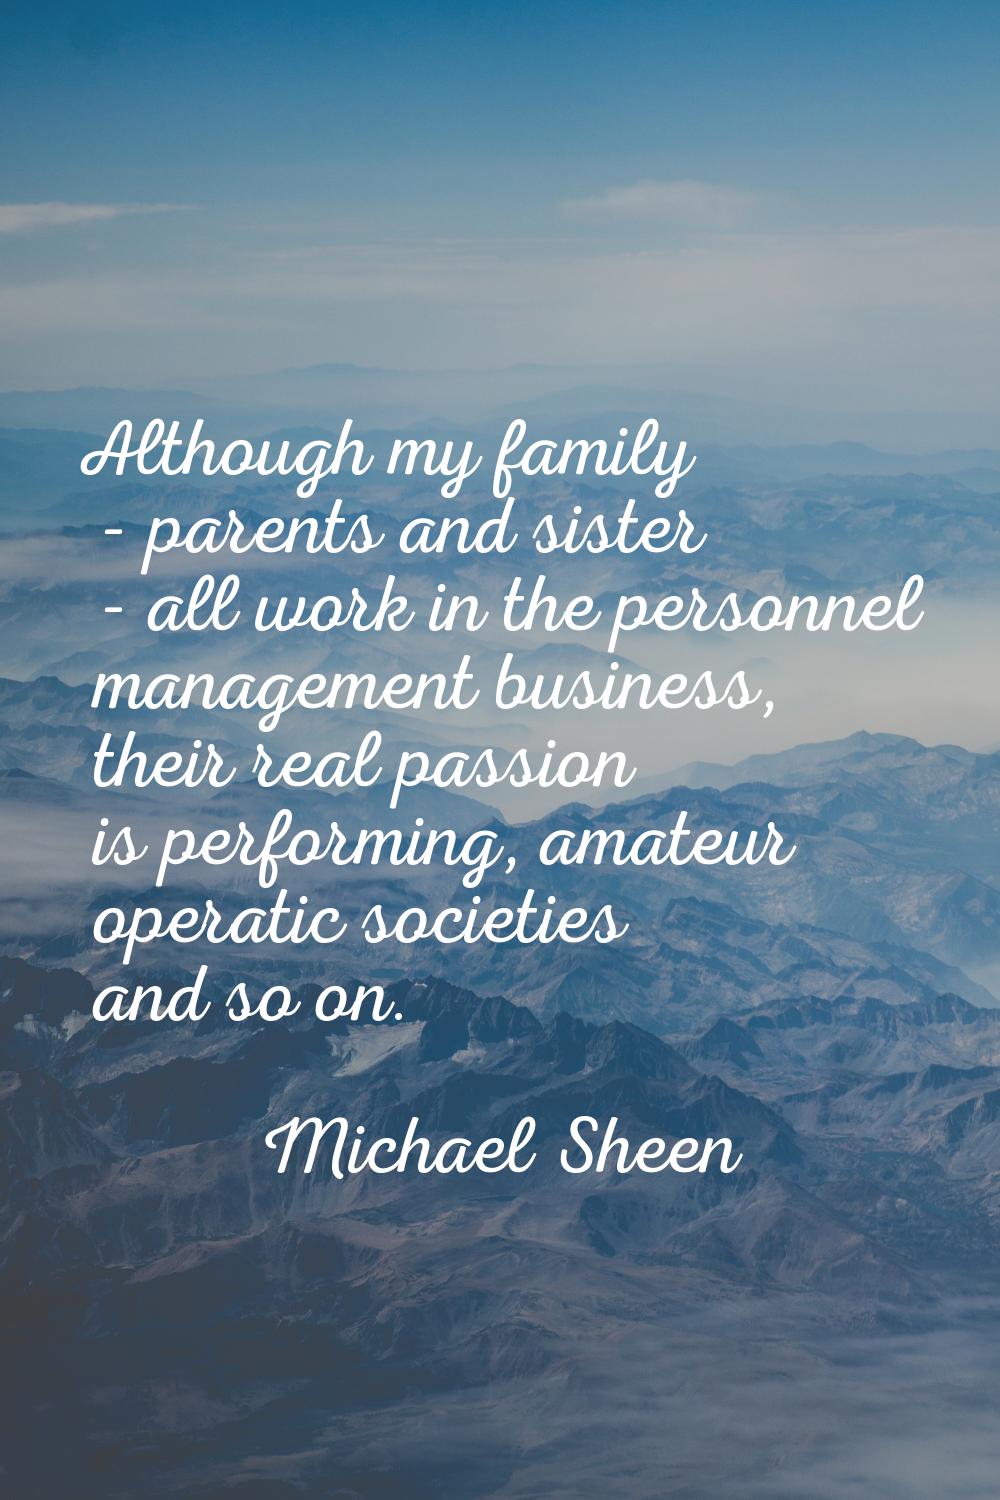 Although my family - parents and sister - all work in the personnel management business, their real